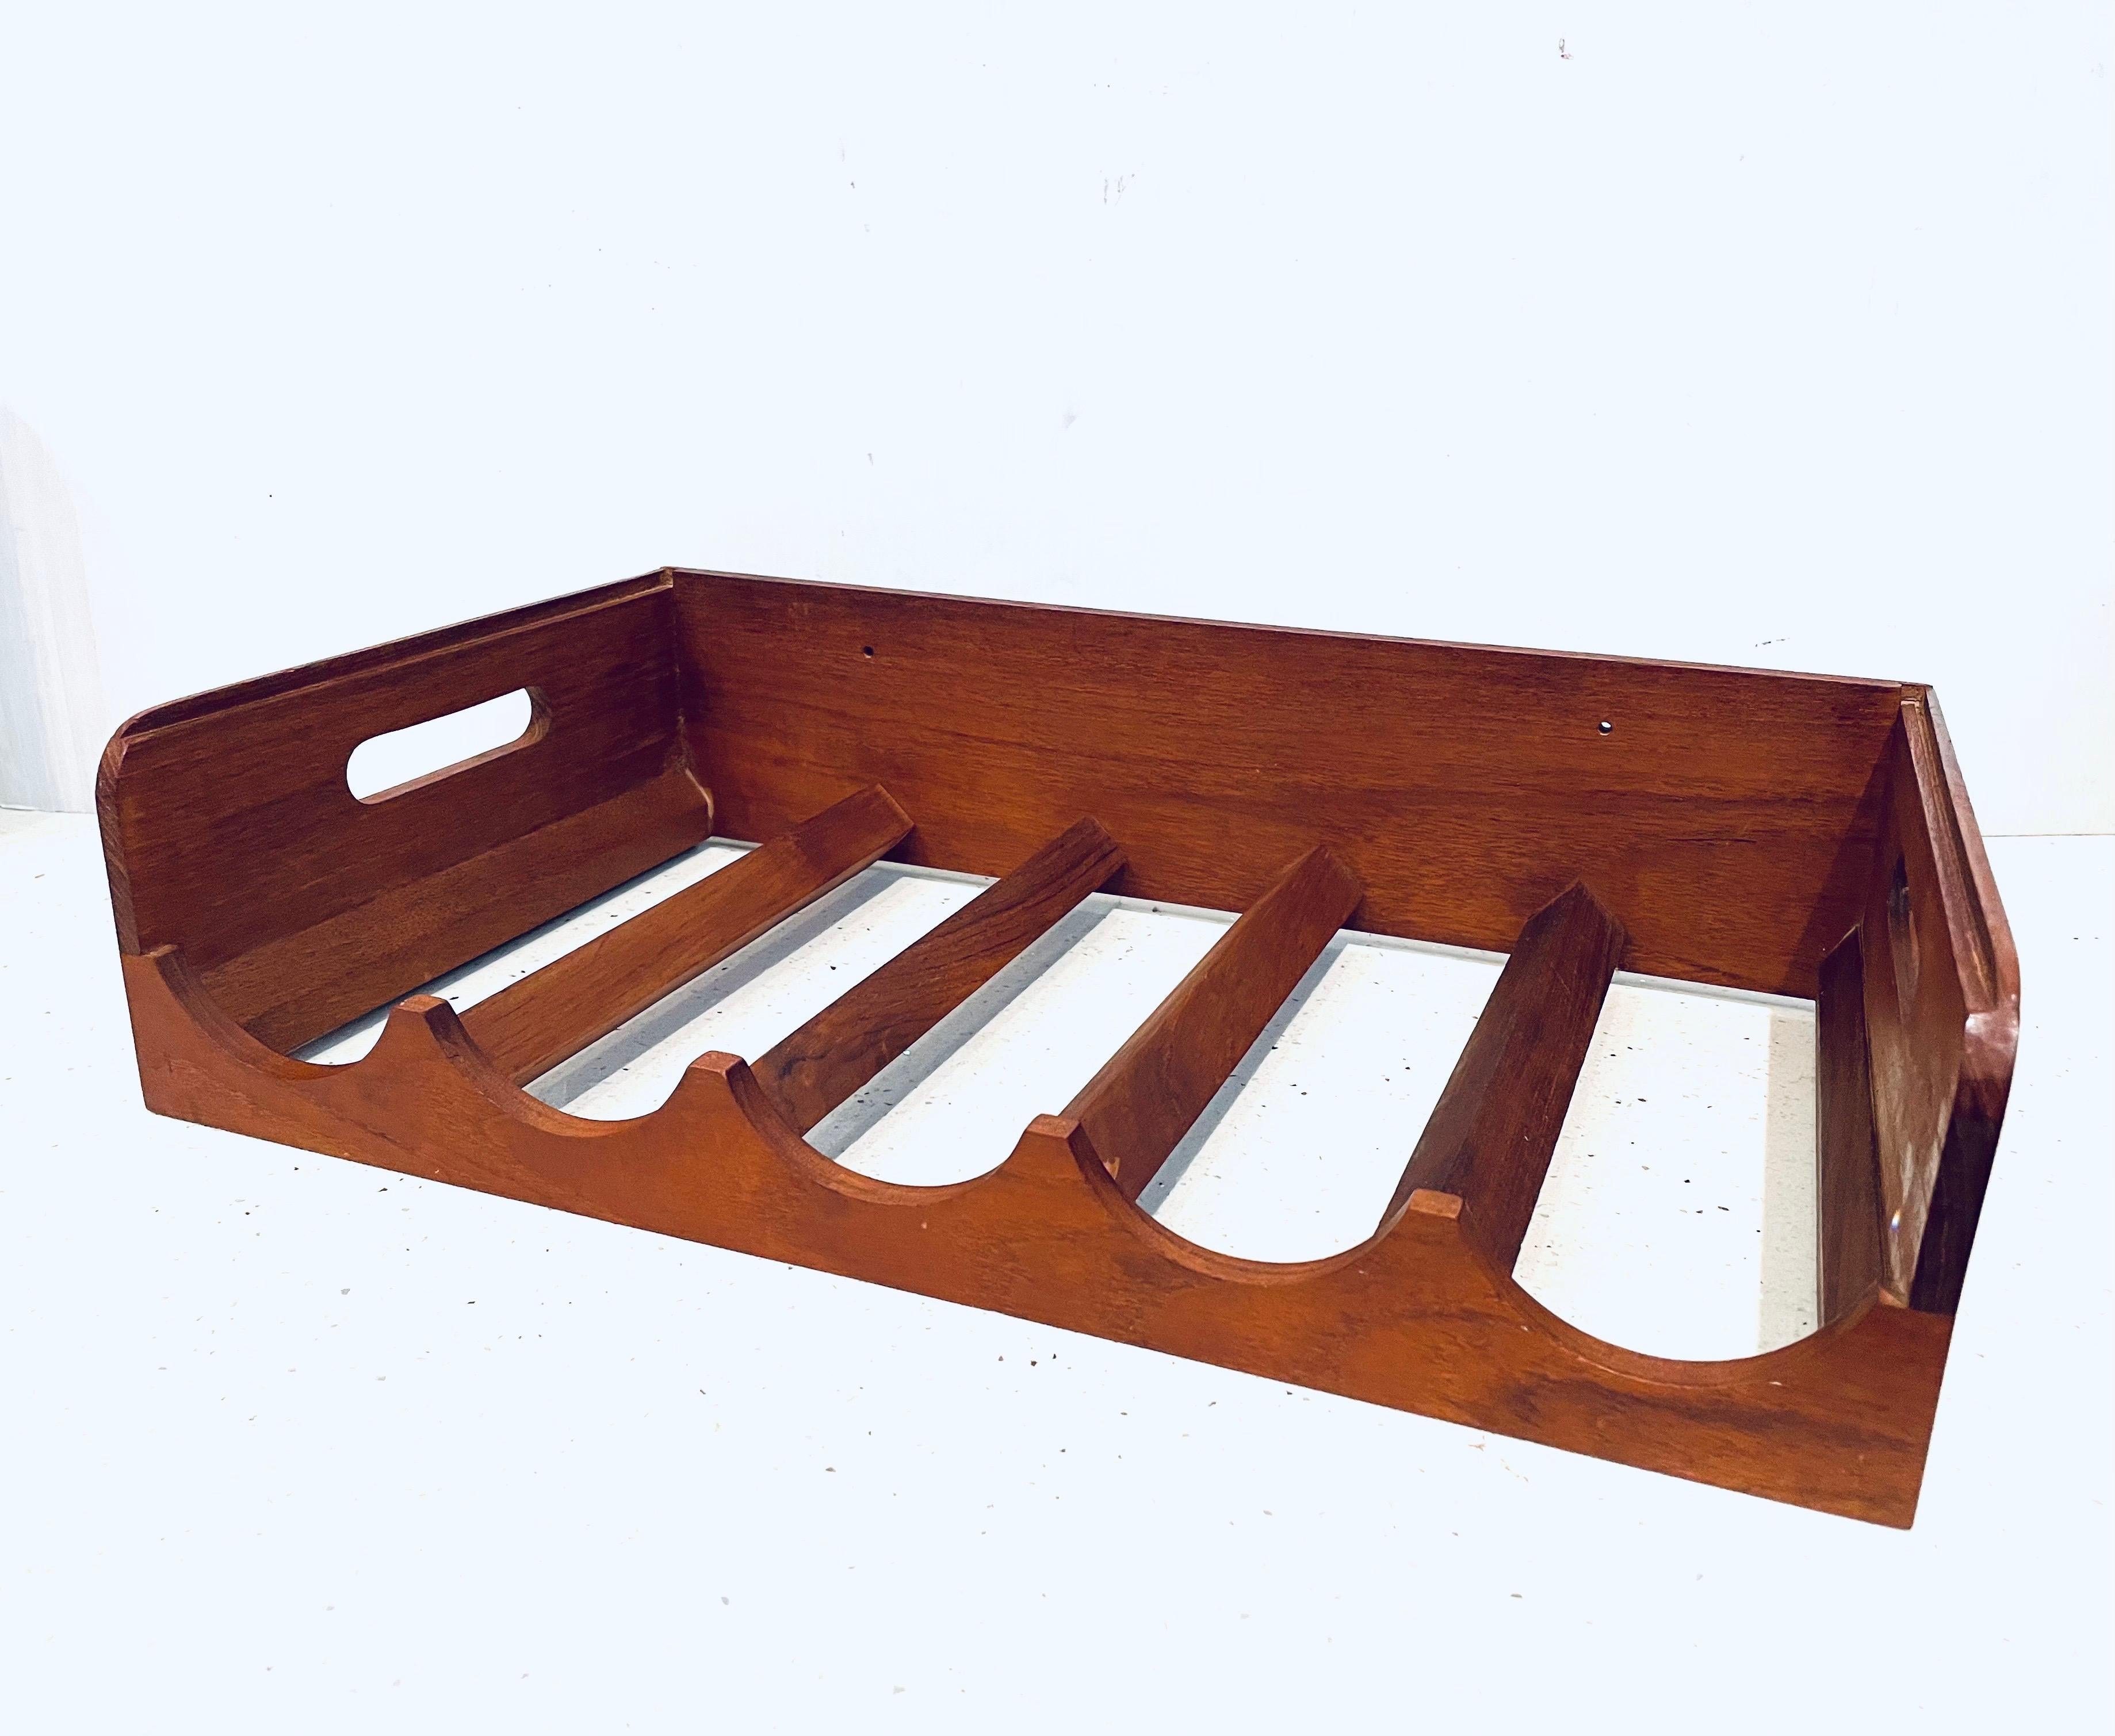 Beautiful simple handcrafted wine rack in solid teak 5 bottle capacity, circa the 1970s. With side handles.